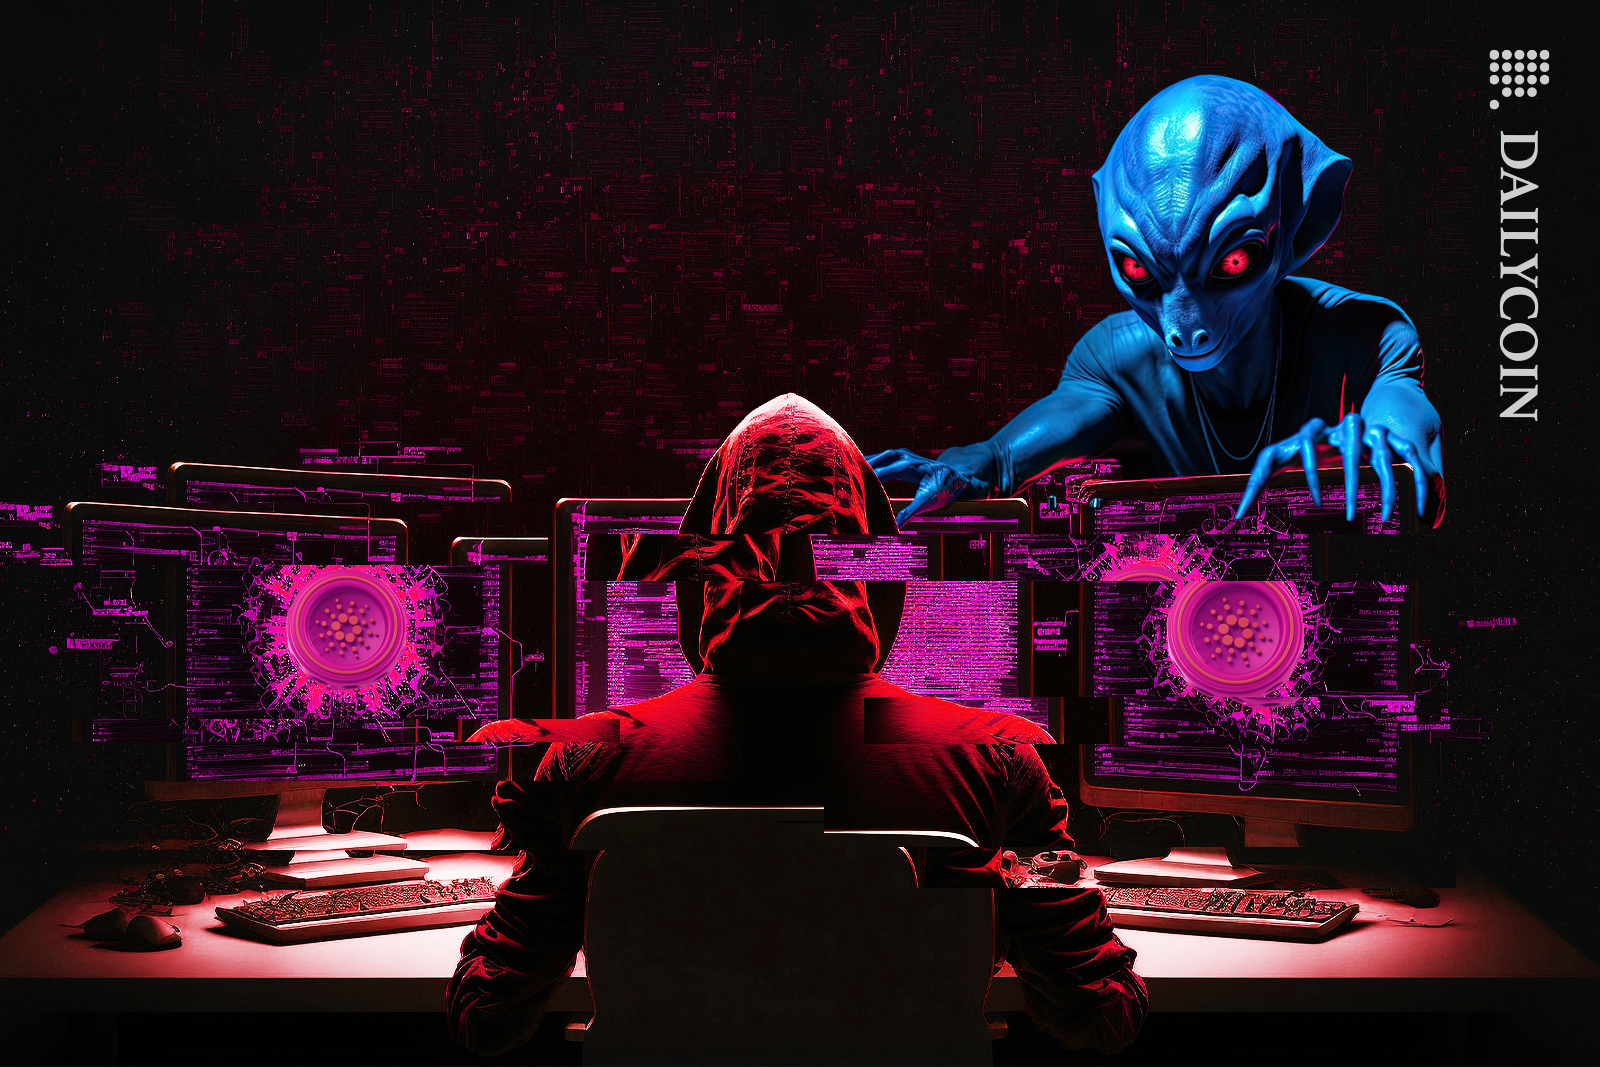 An alien looking at a hooded hacker working on computers with Cardano coins on display.